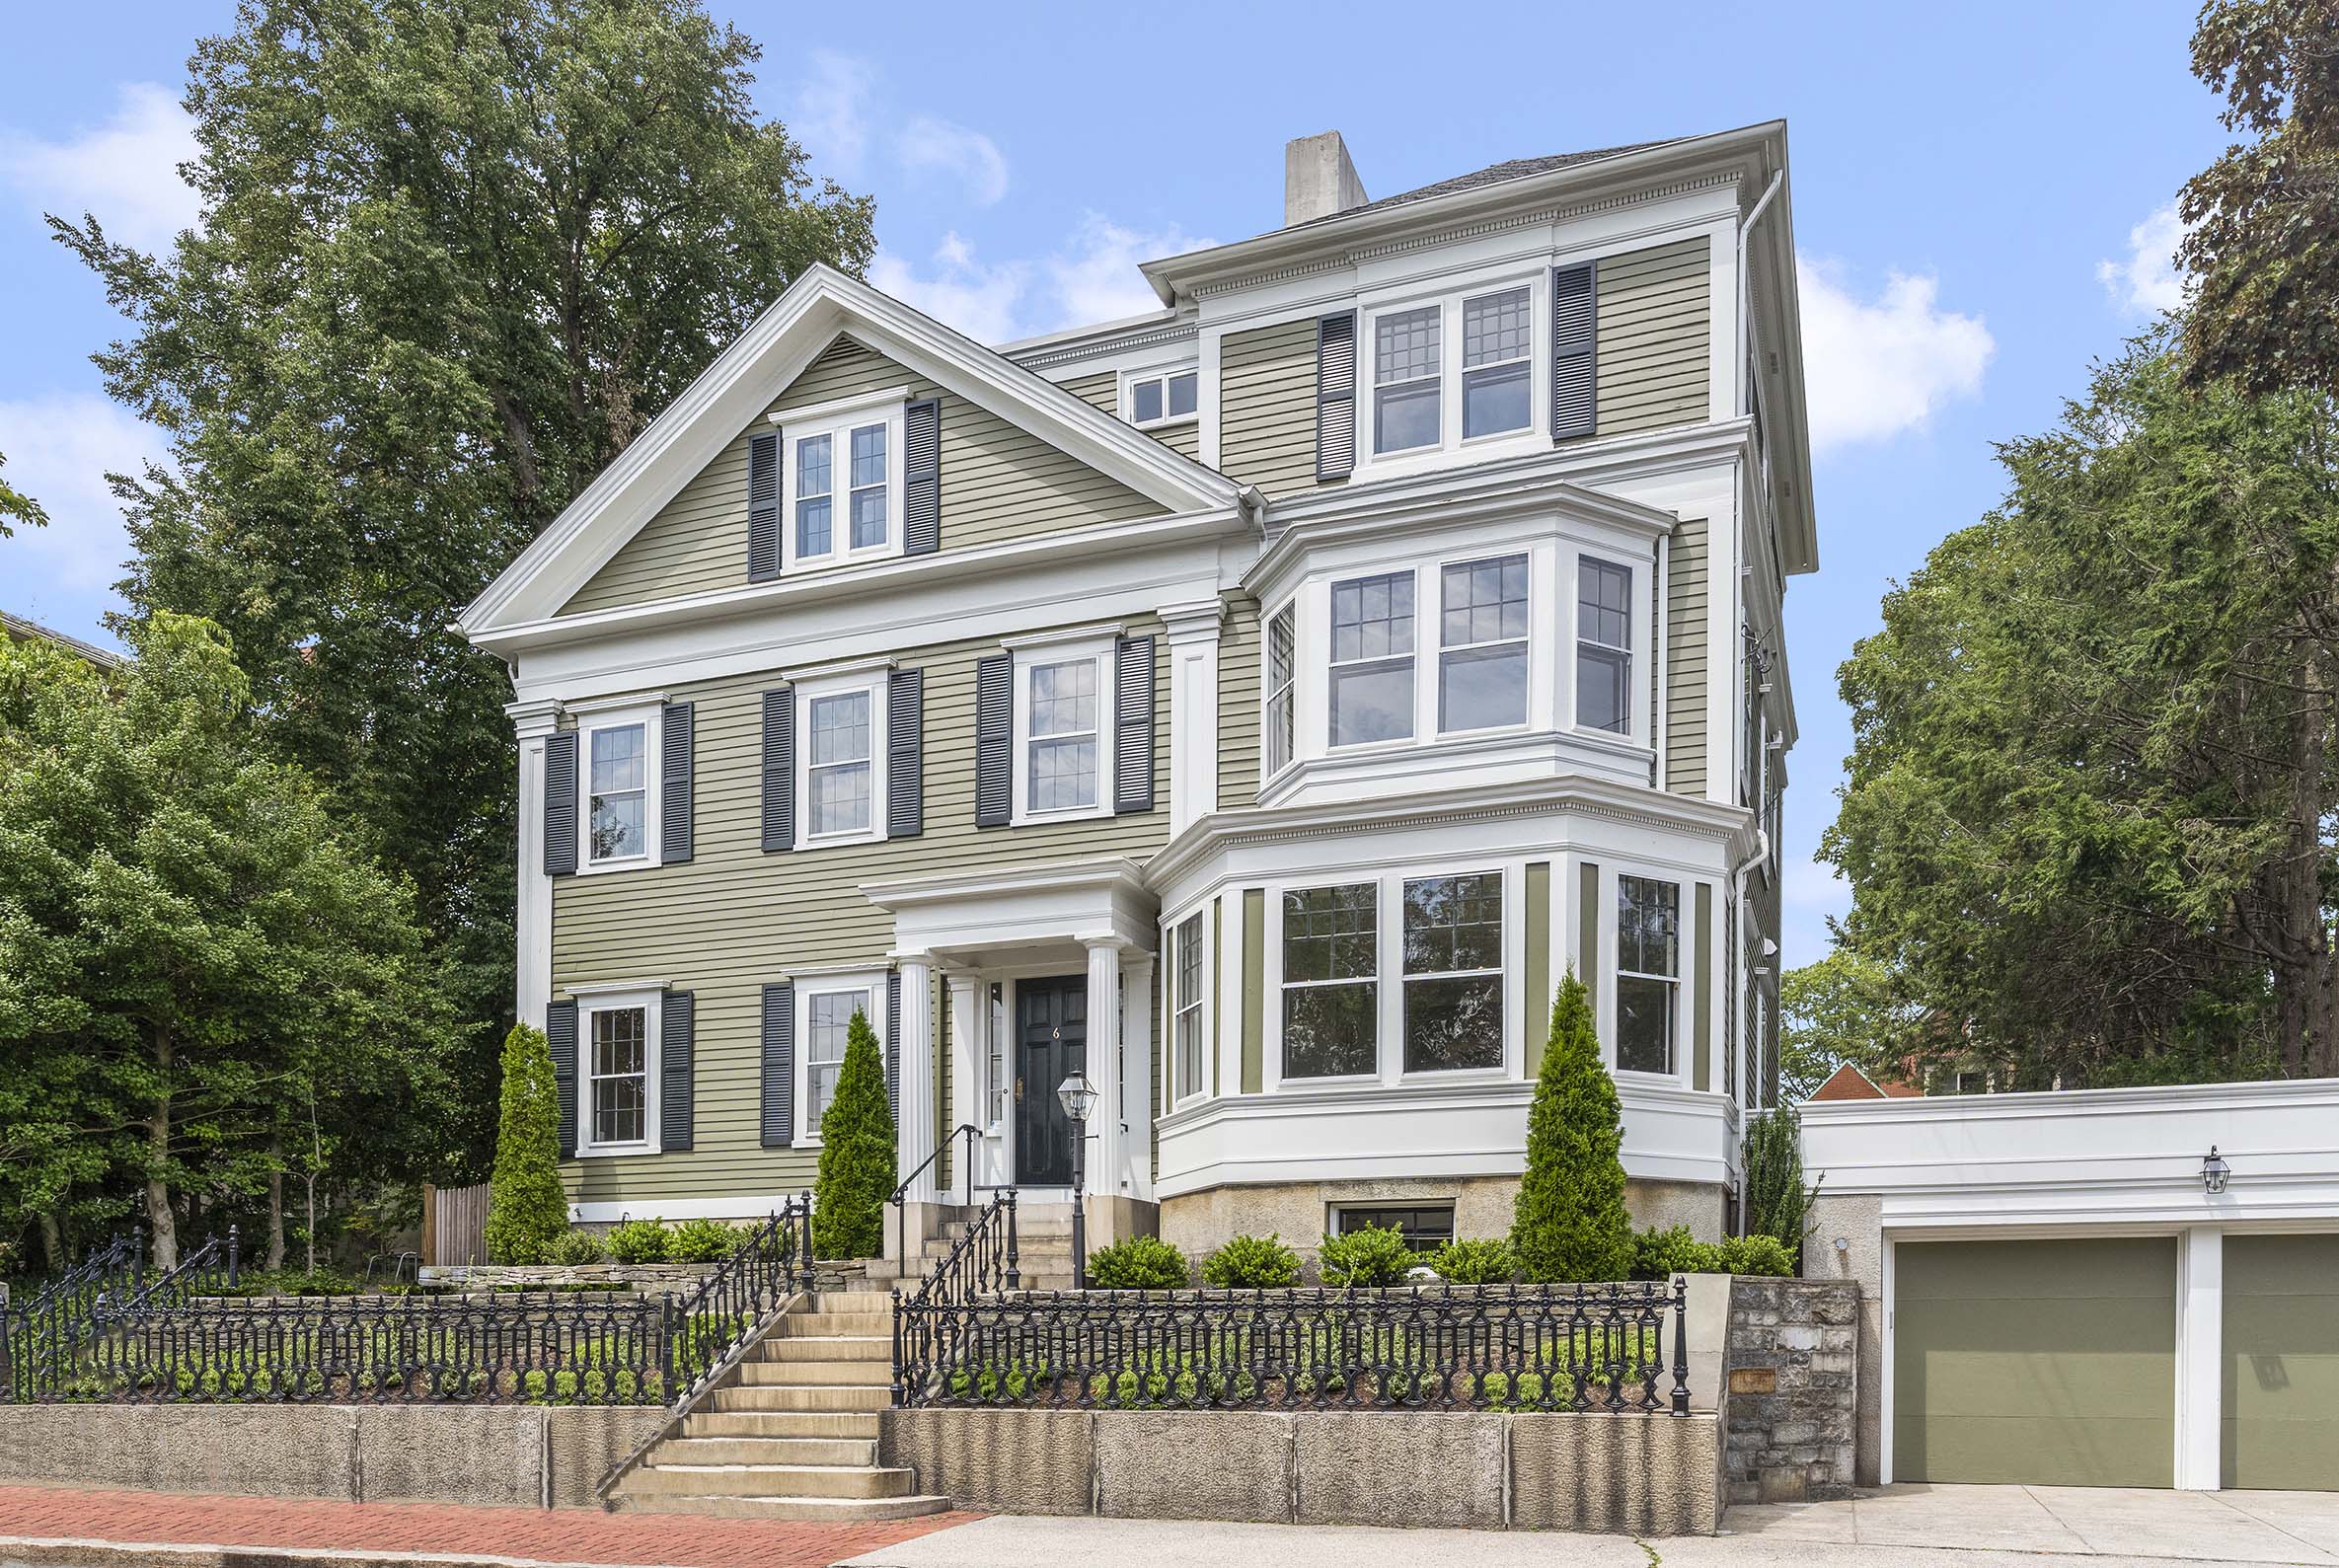 ‘WILLIAM DOUGLAS HOUSE’, A GREEK REVIVAL HOME ON EAST OF PROV, SELLS FOR $1.710M